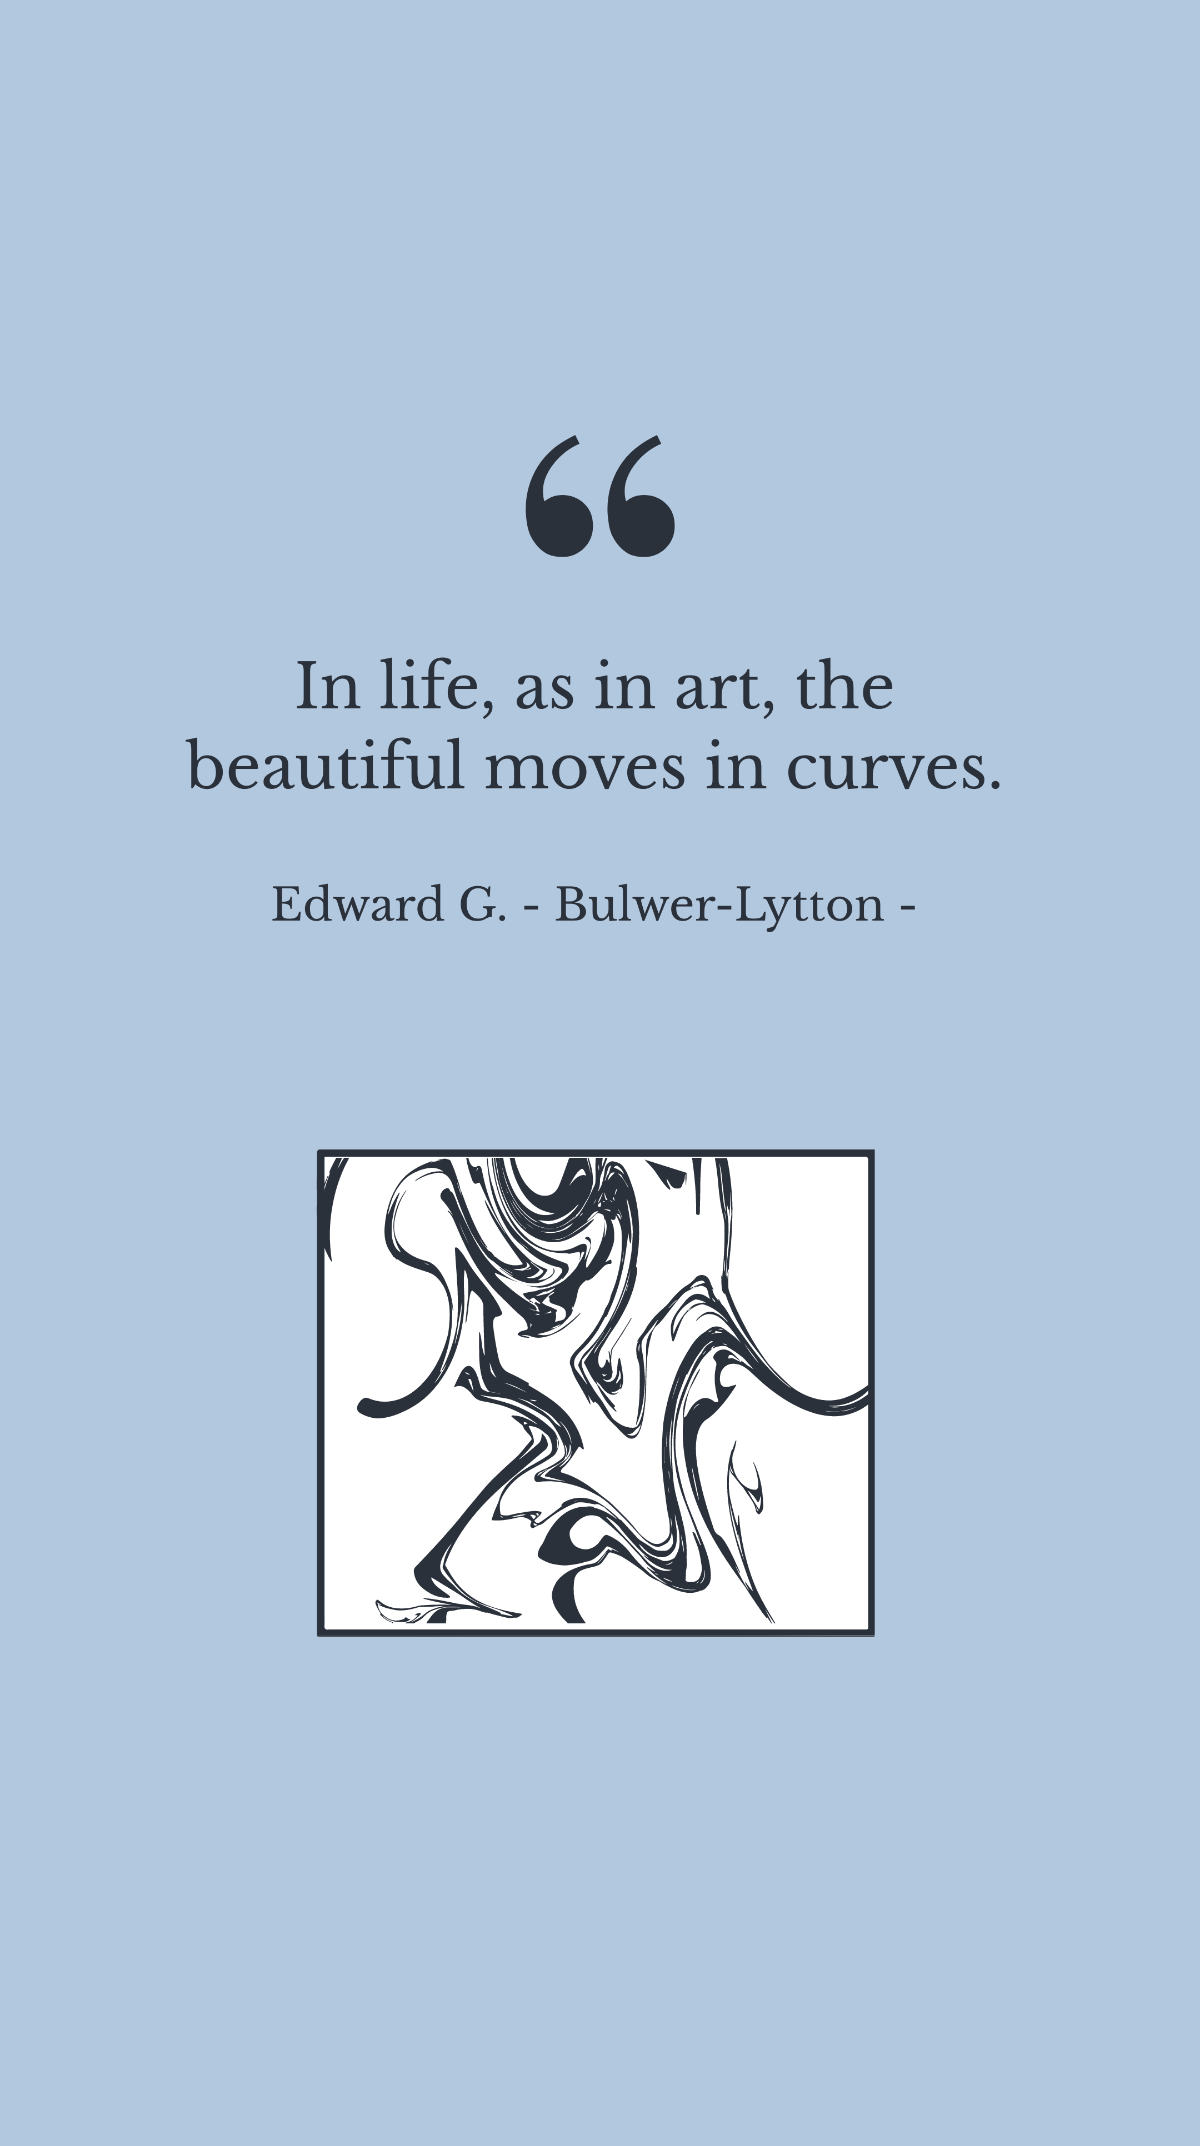 Edward G. - Bulwer-Lytton - In life, as in art, the beautiful moves in curves. Template